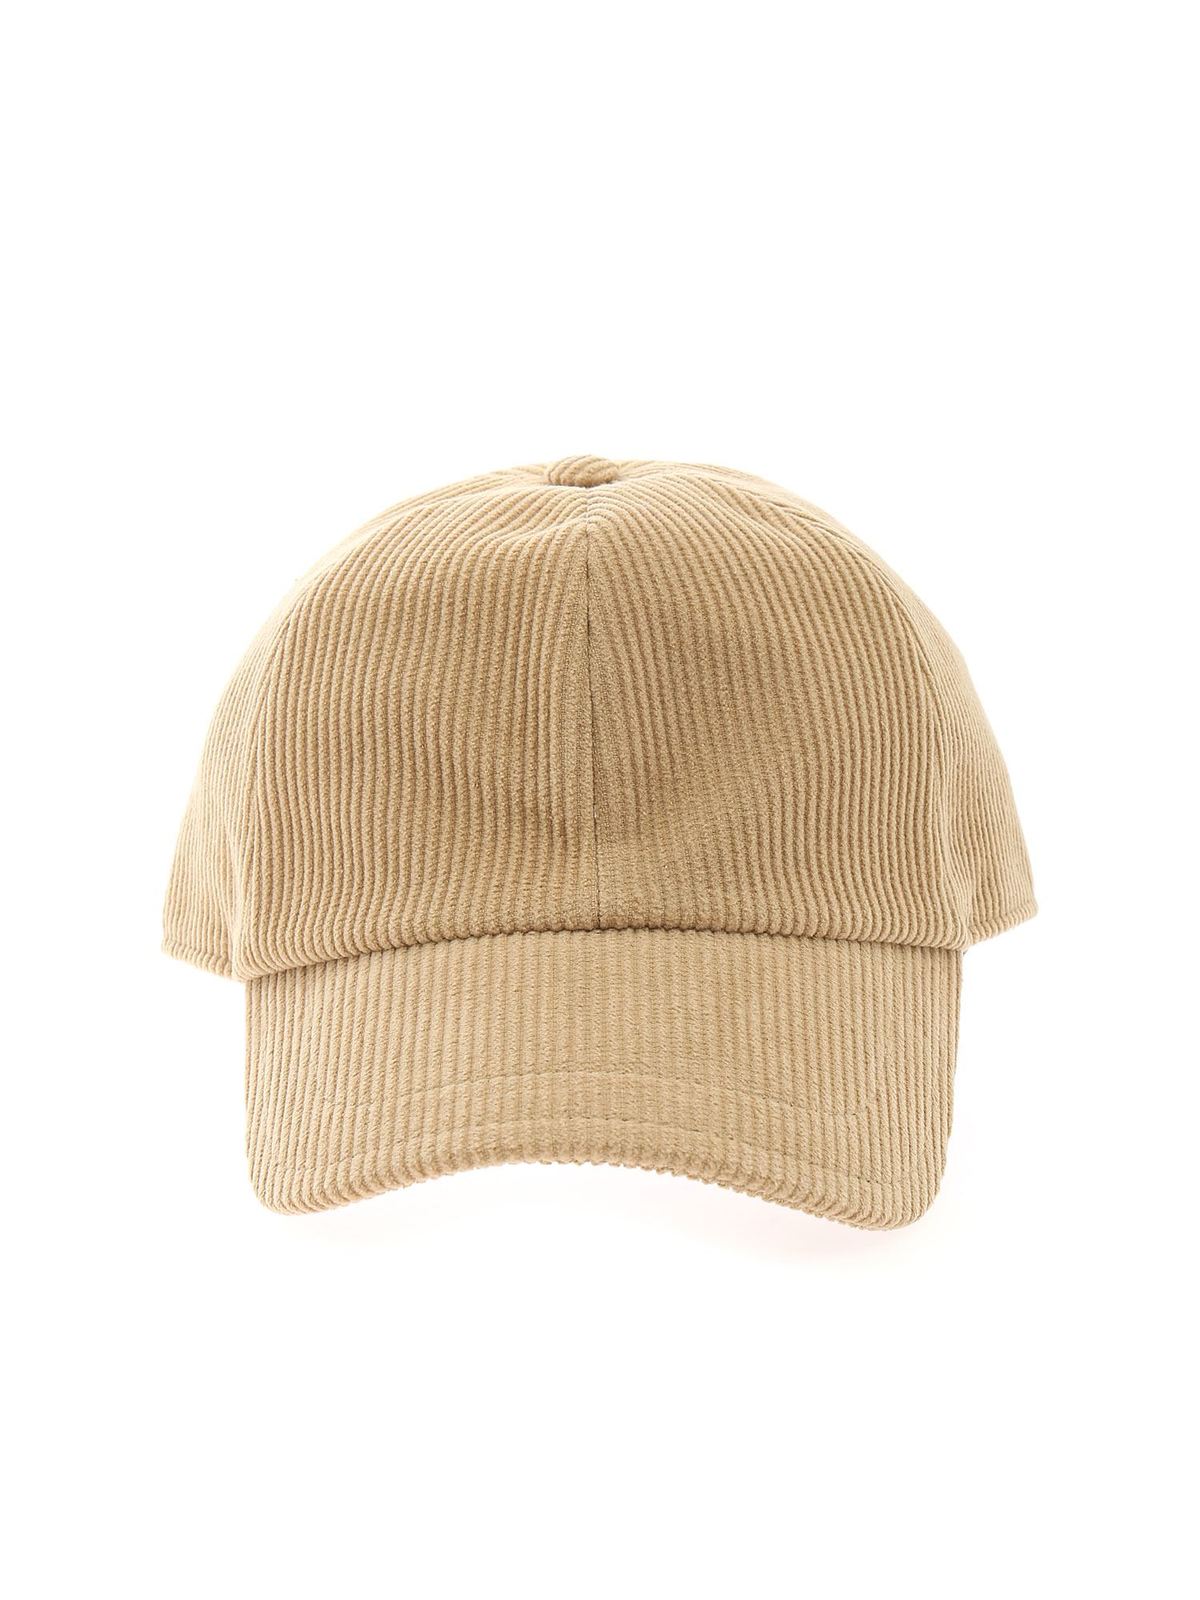 Hats & caps Eleventy - Ribbed cap in beige - D77CPLD06TES0D16702